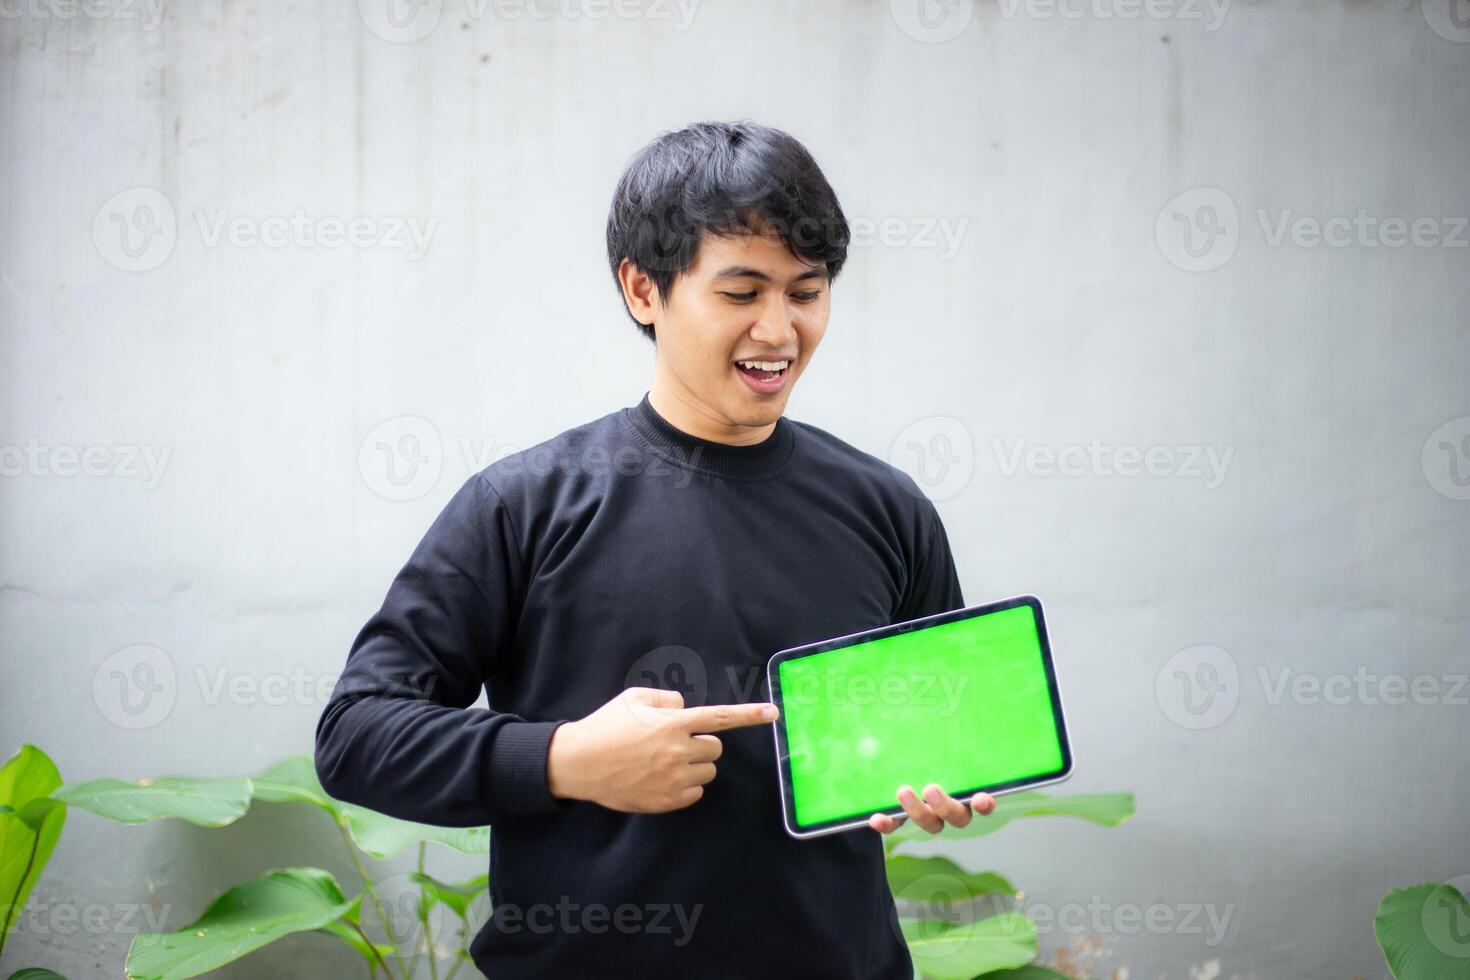 Young Asian man with a black sweater holding and pointing at an iPad tablet green screen mockup photo